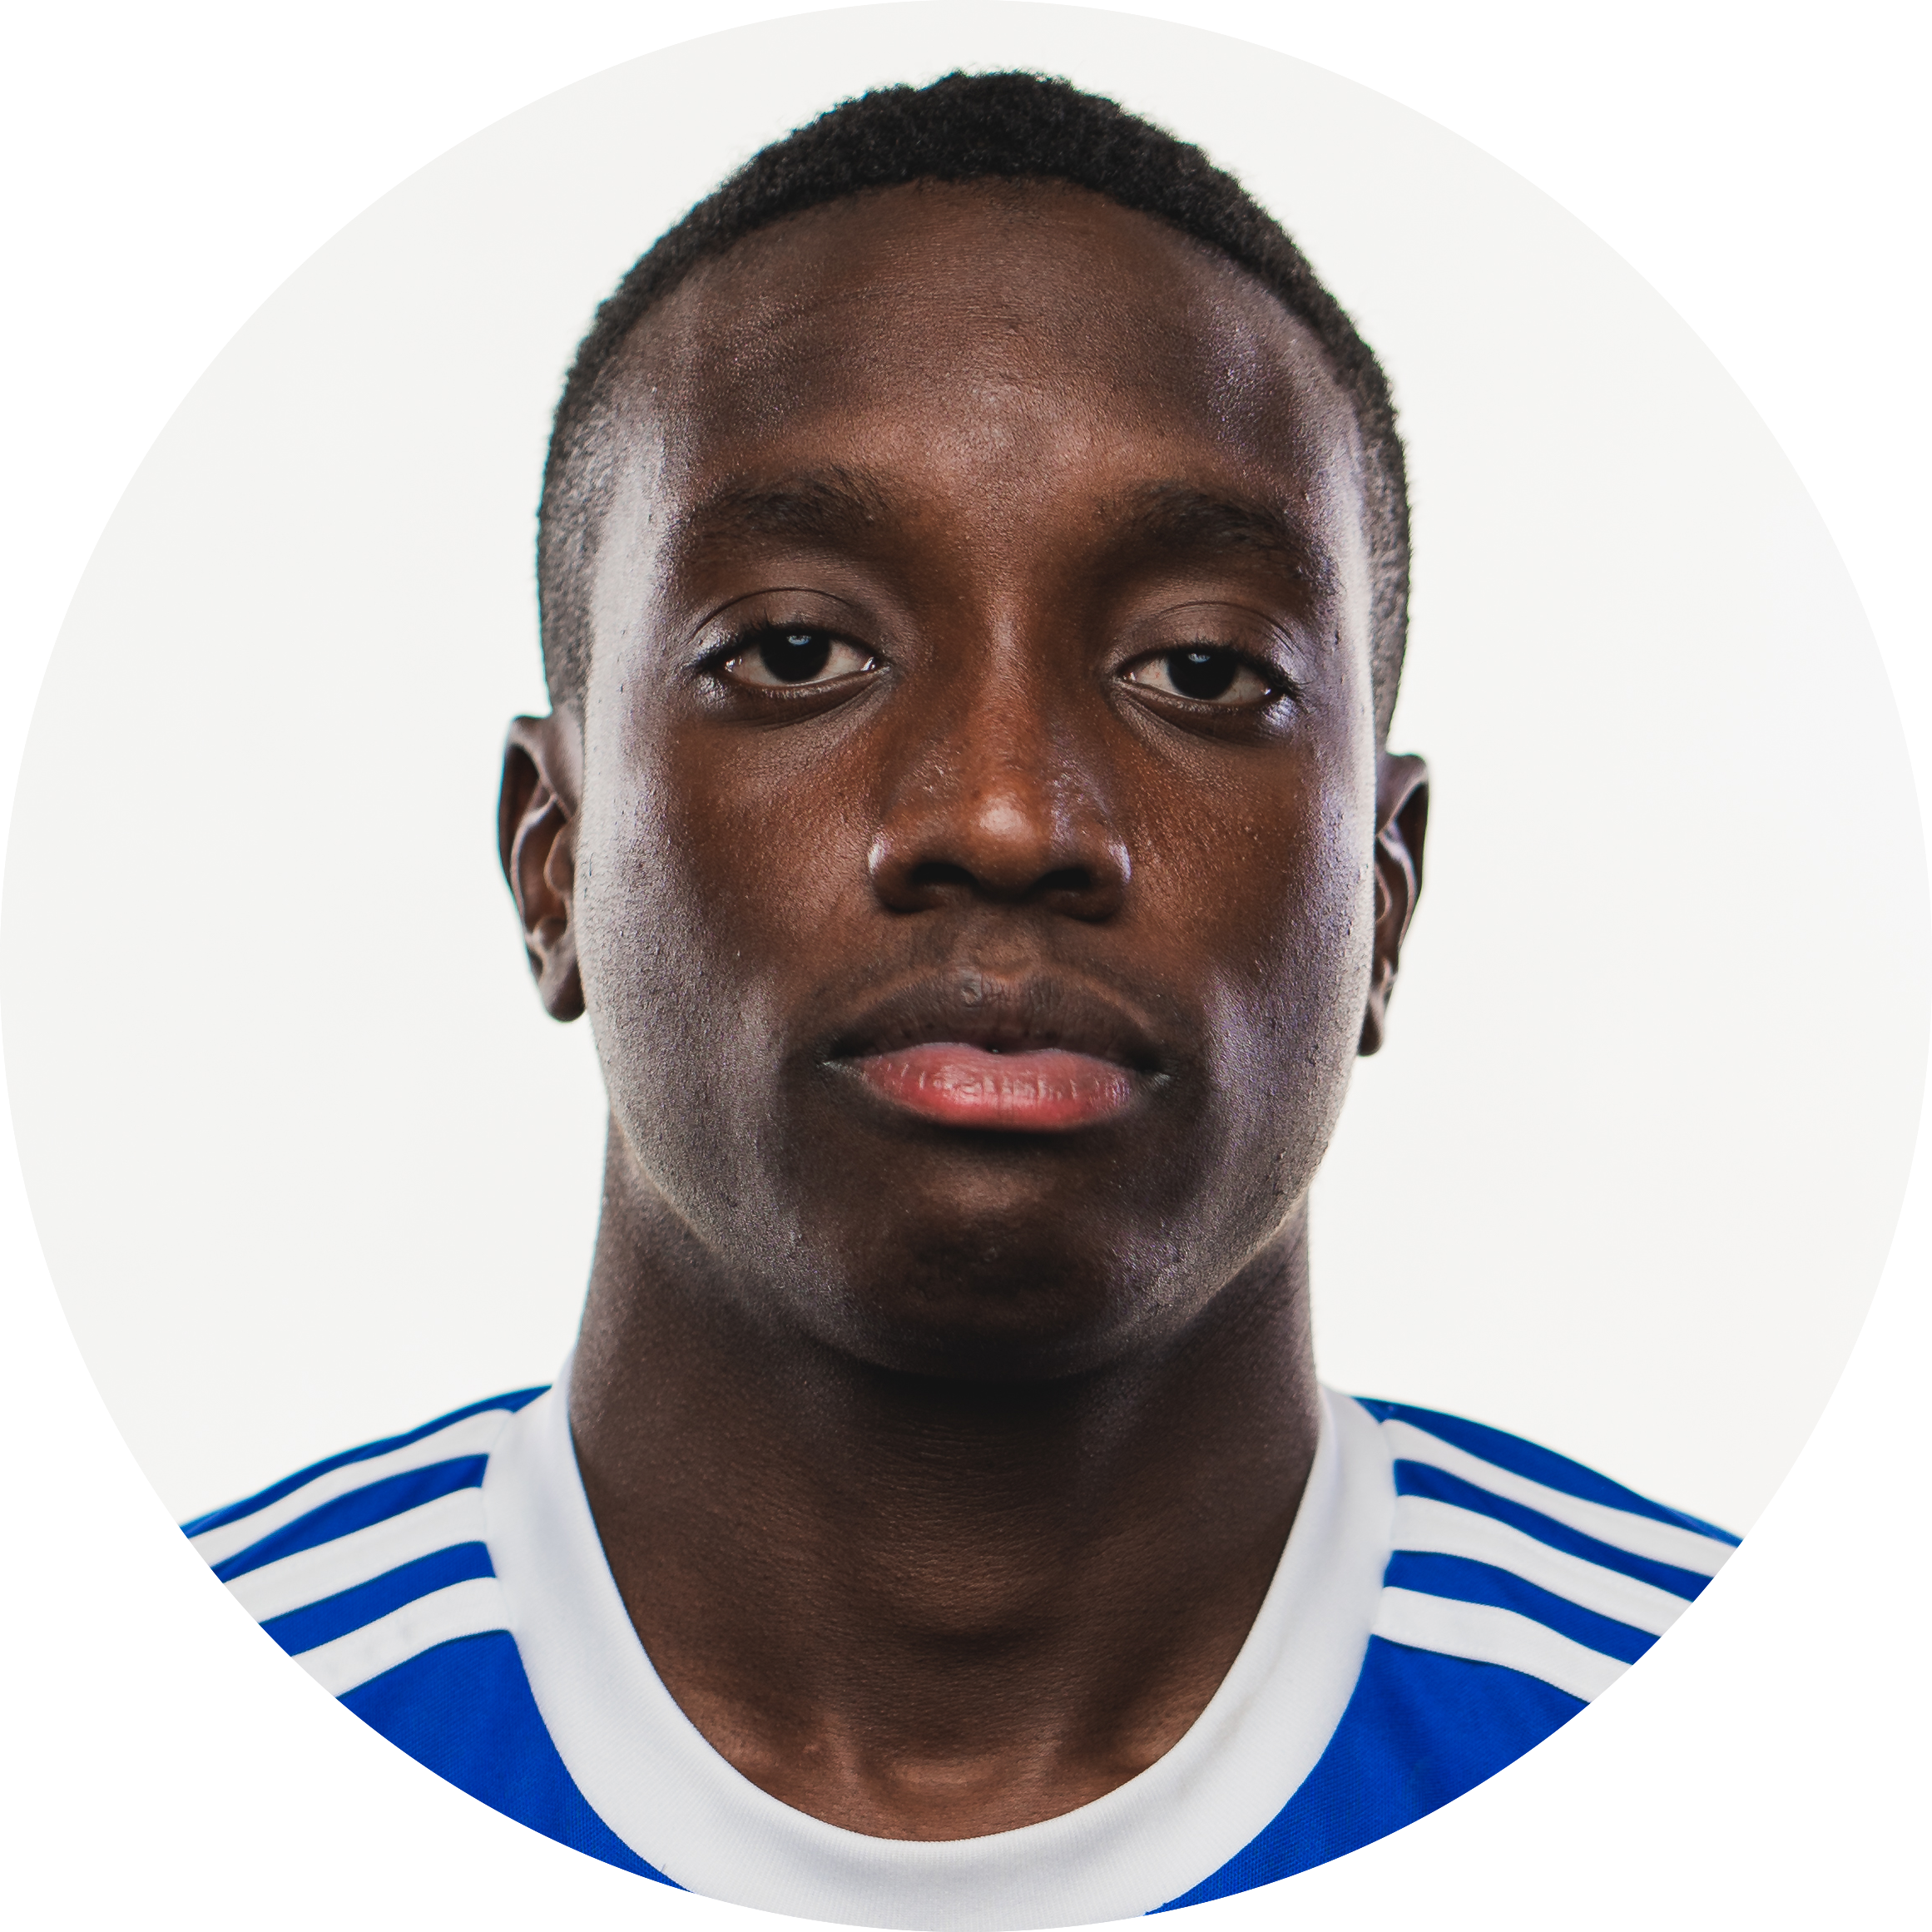 https://usports.ca/uploads/cis/Awards/sports_awards/MSOC/2019-20/Player_of_the_Year/6_-_Aboubacar_Sissoko.png